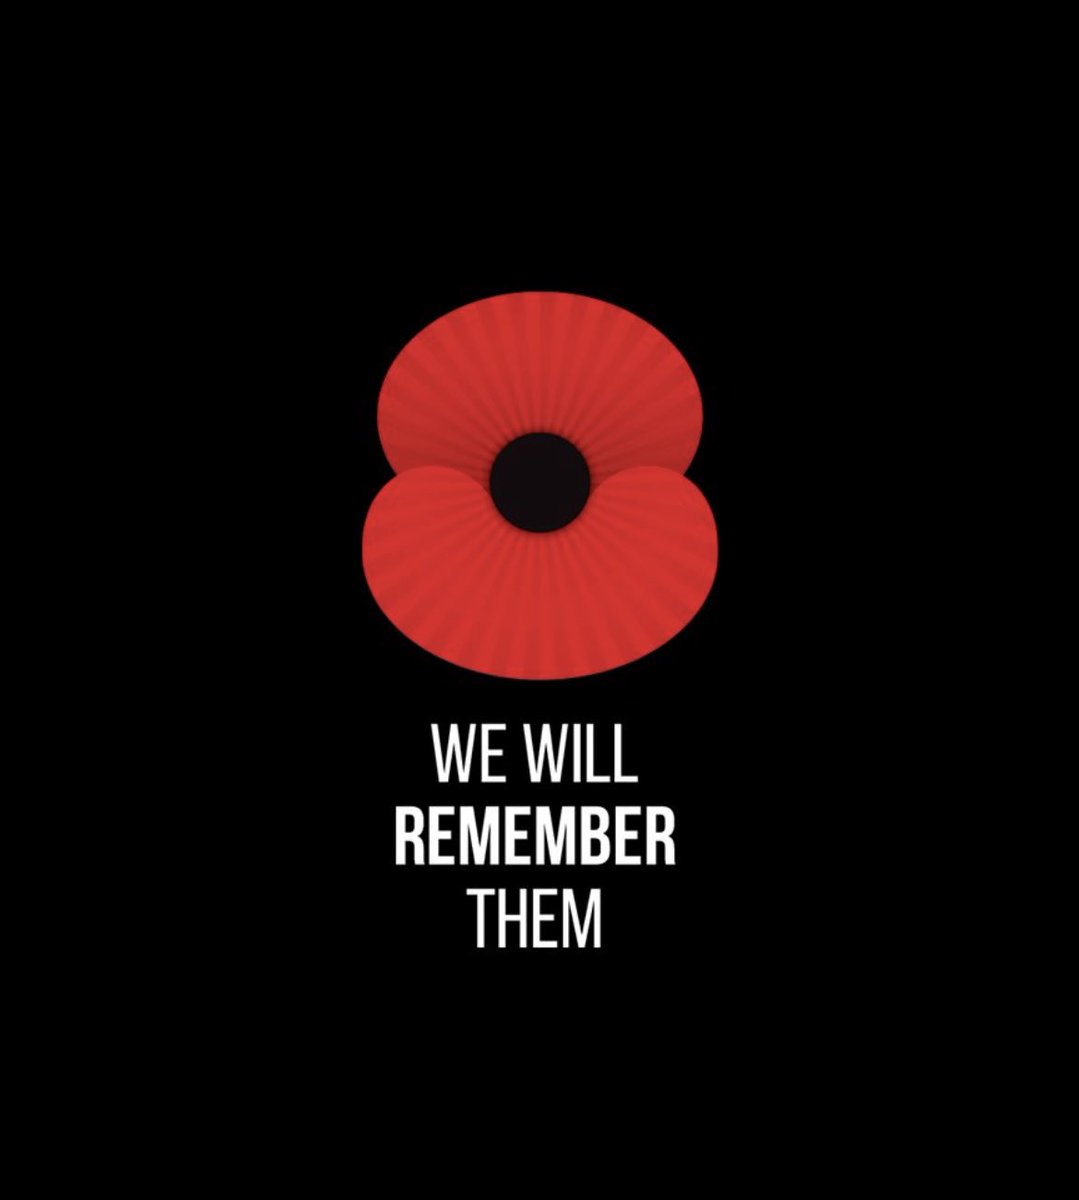 'They shall grow not old, as we that are left grow old; Age shall not weary them, nor the years condemn. At the going down of the sun and in the morning We will remember them.' #LestWeForget  #RemembranceDay